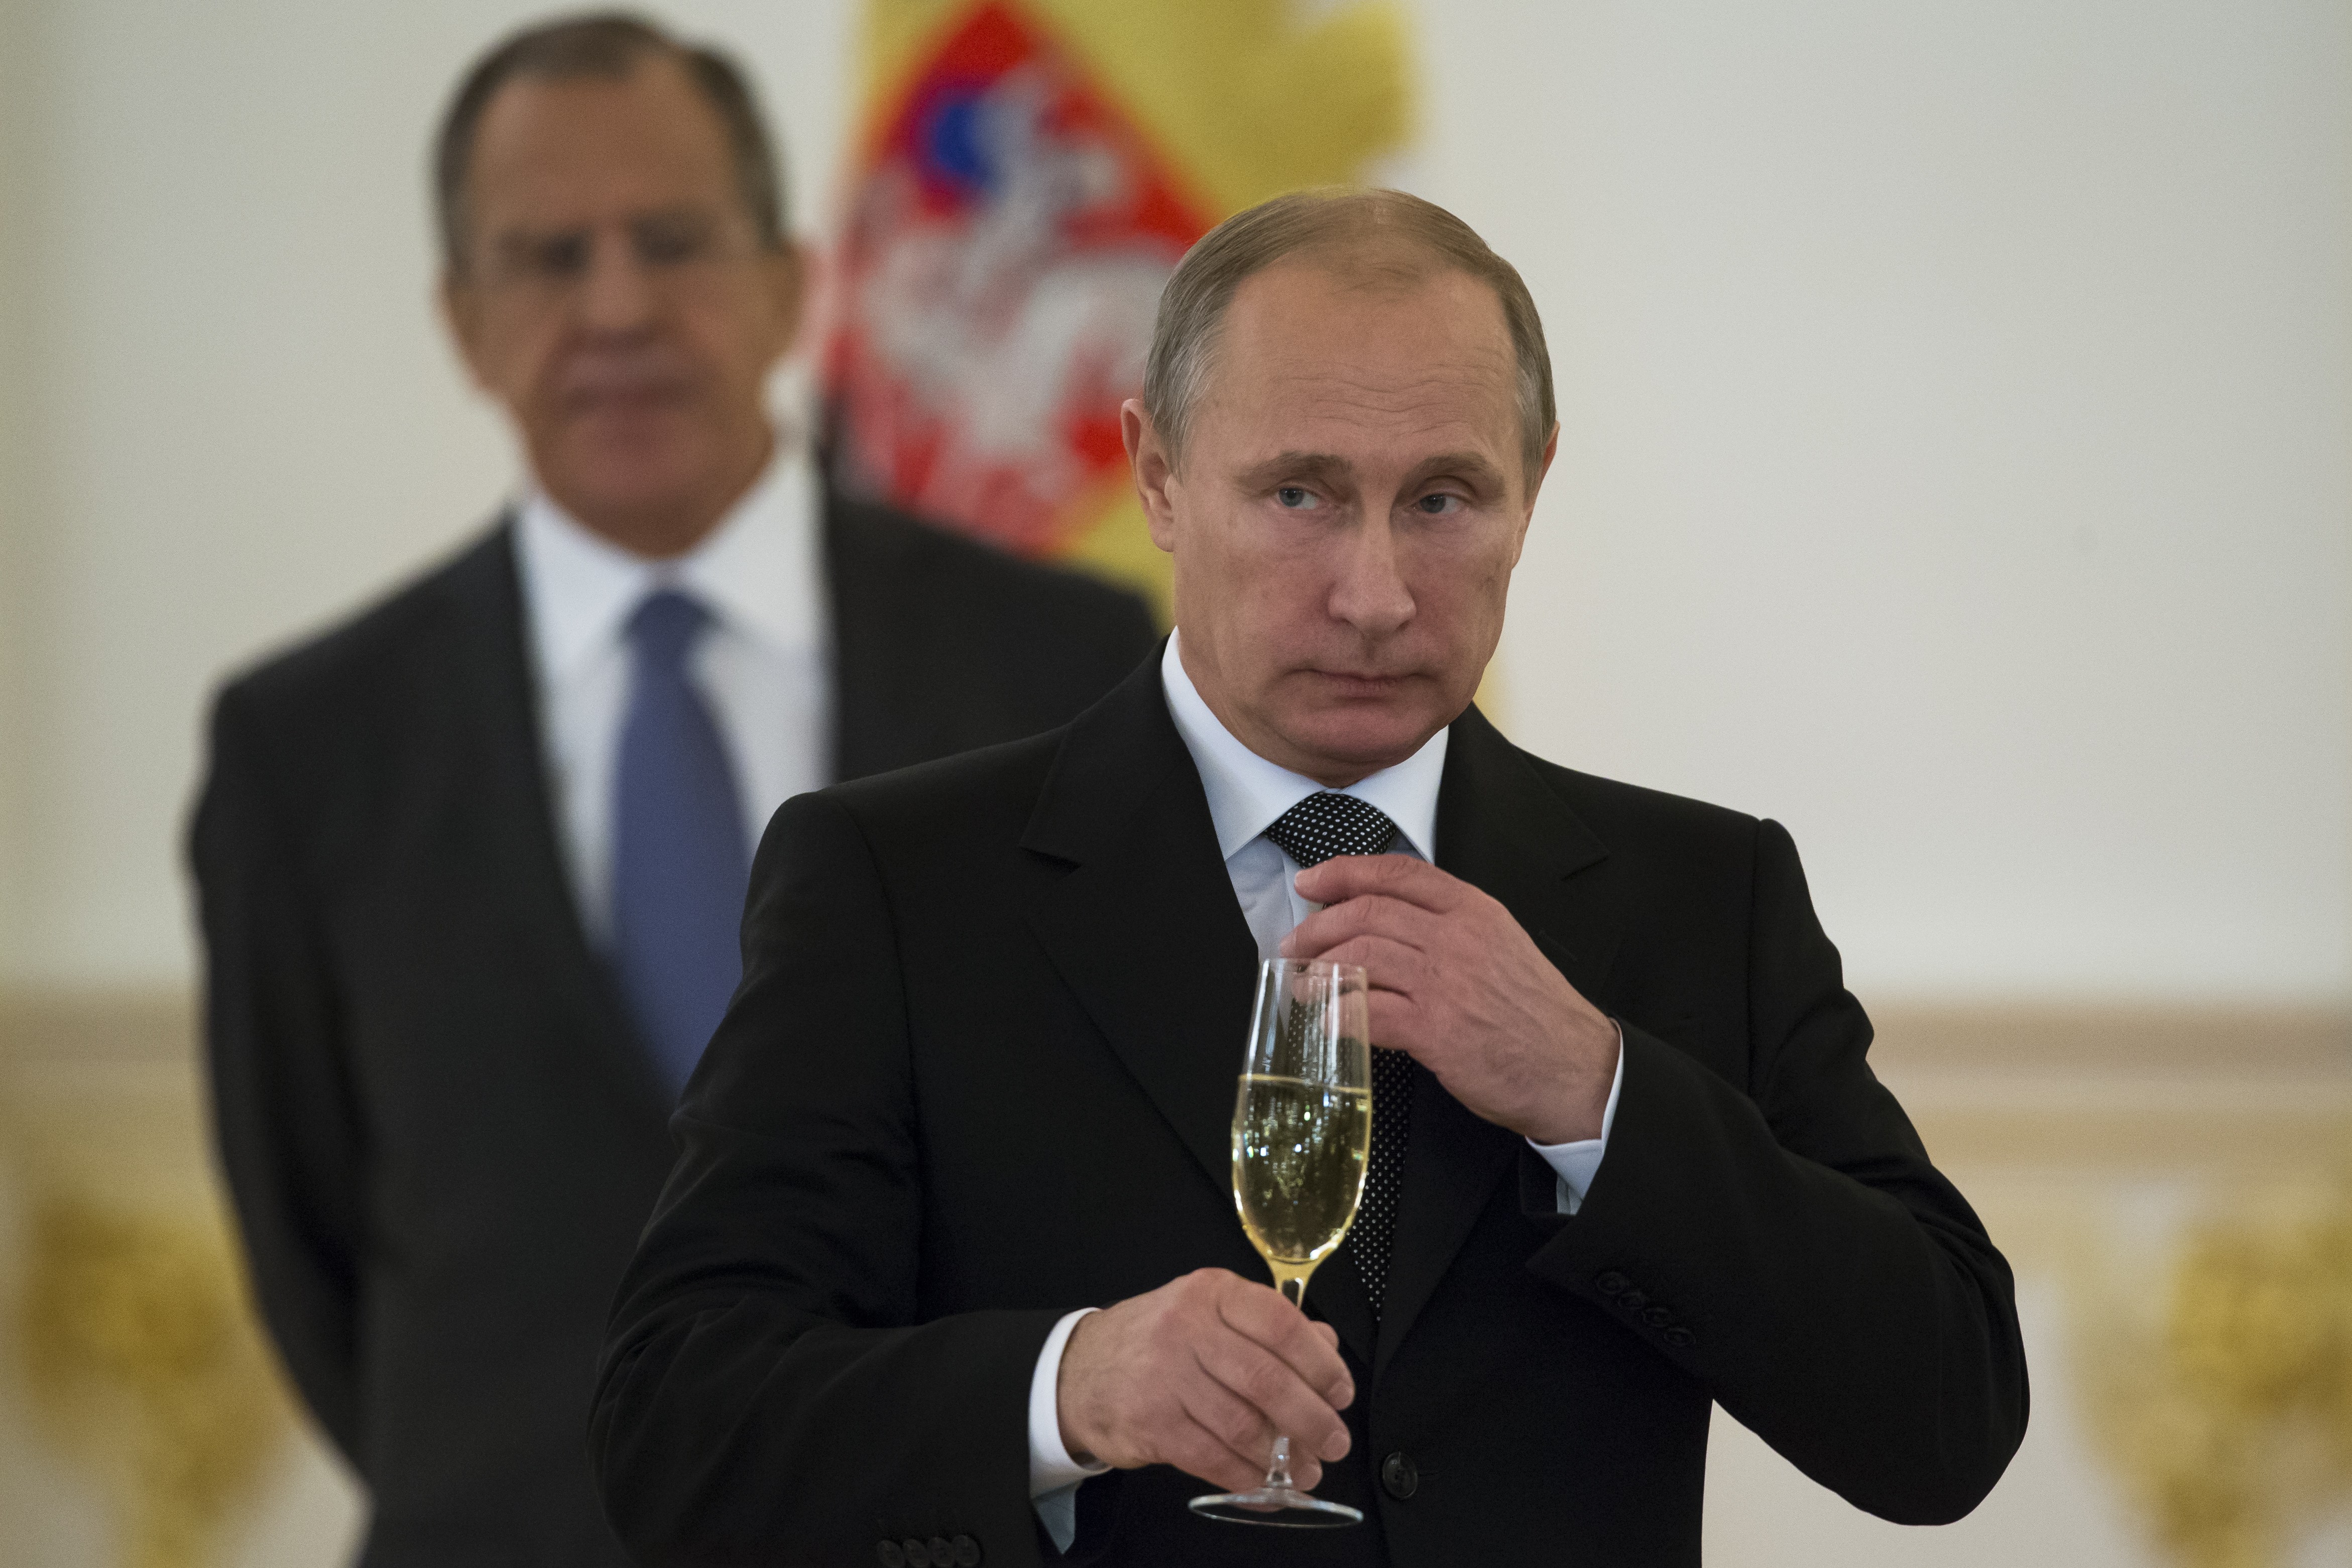 Russian President Vladimir Putin prepares to toast with ambassadors in the Alexander Hall after a ceremony of presentation of credentials by foreign ambassadors in the Grand Kremlin Palace in Moscow, Russia, Wednesday, Nov. 19, 2014. (Alexander Zemlianichenko—AP)